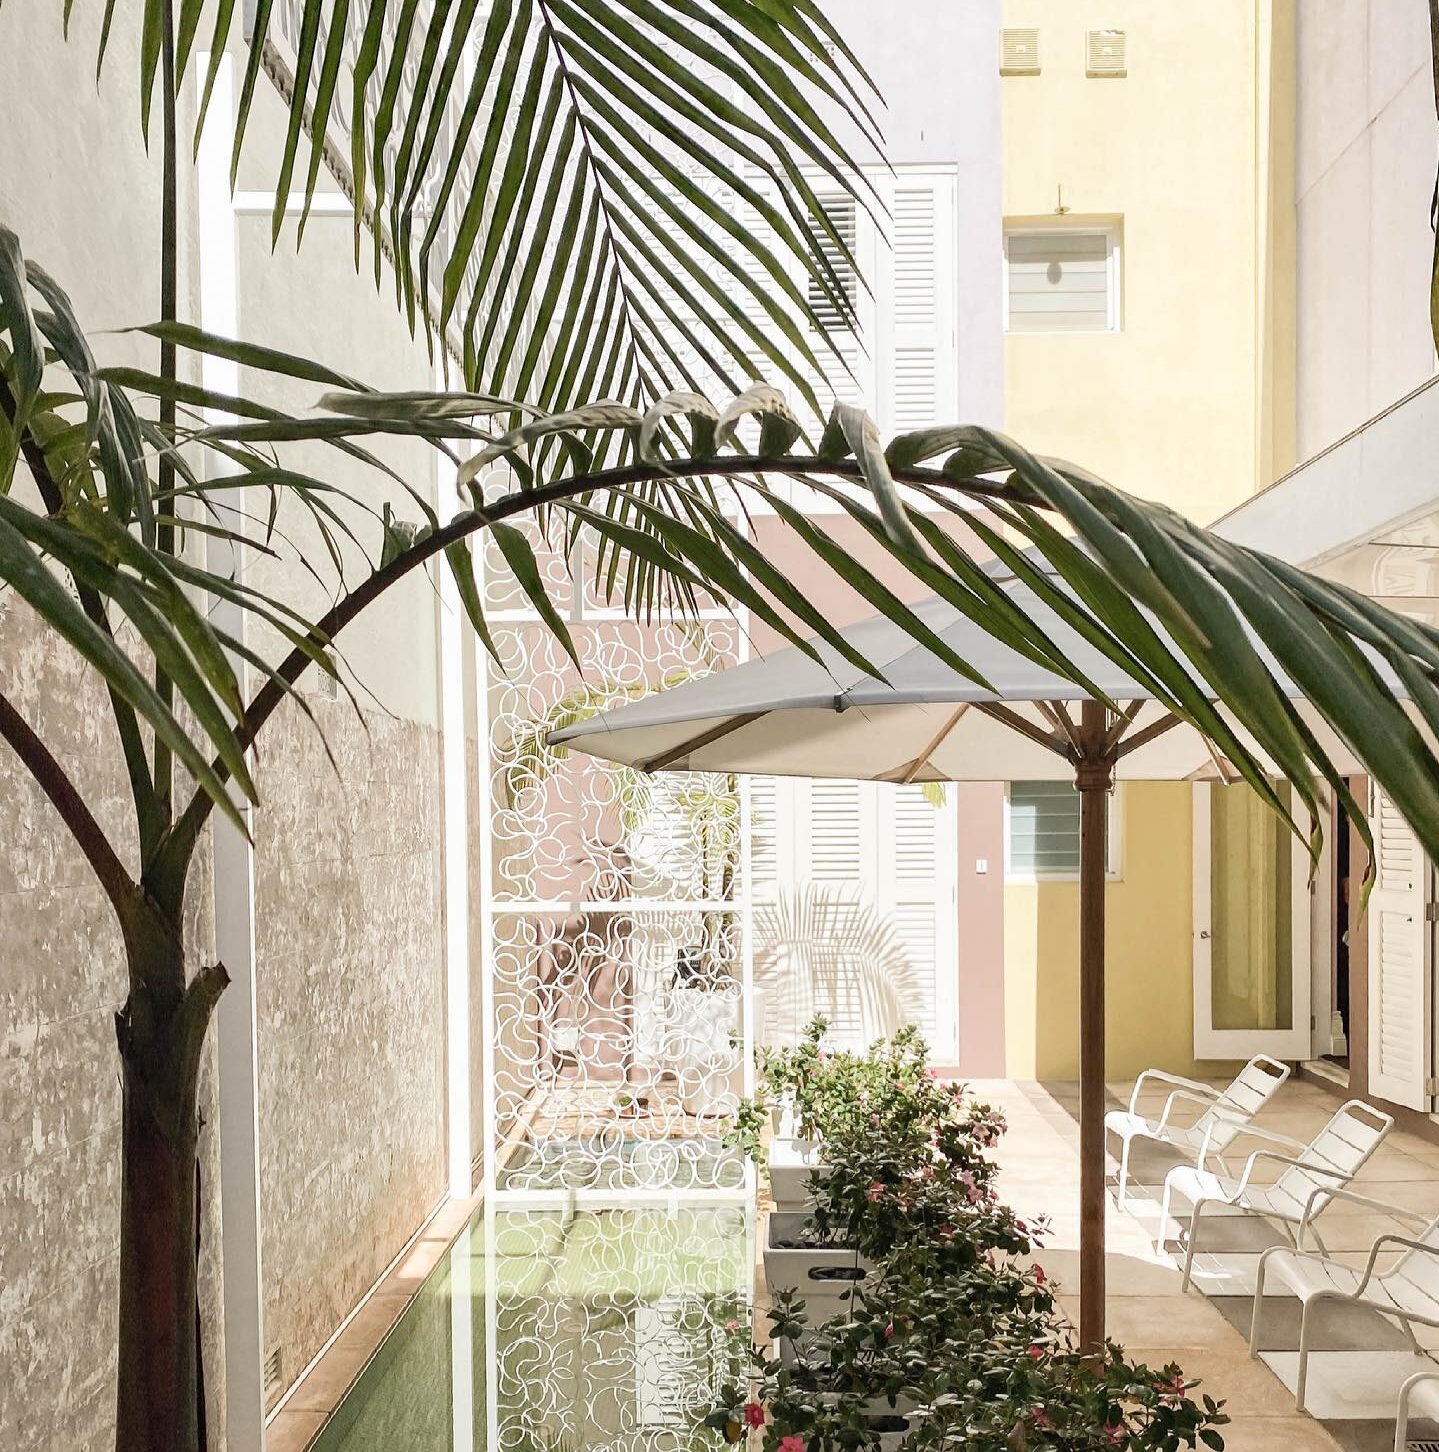 As close as the palm of your hand – is the Medusa courtyard.